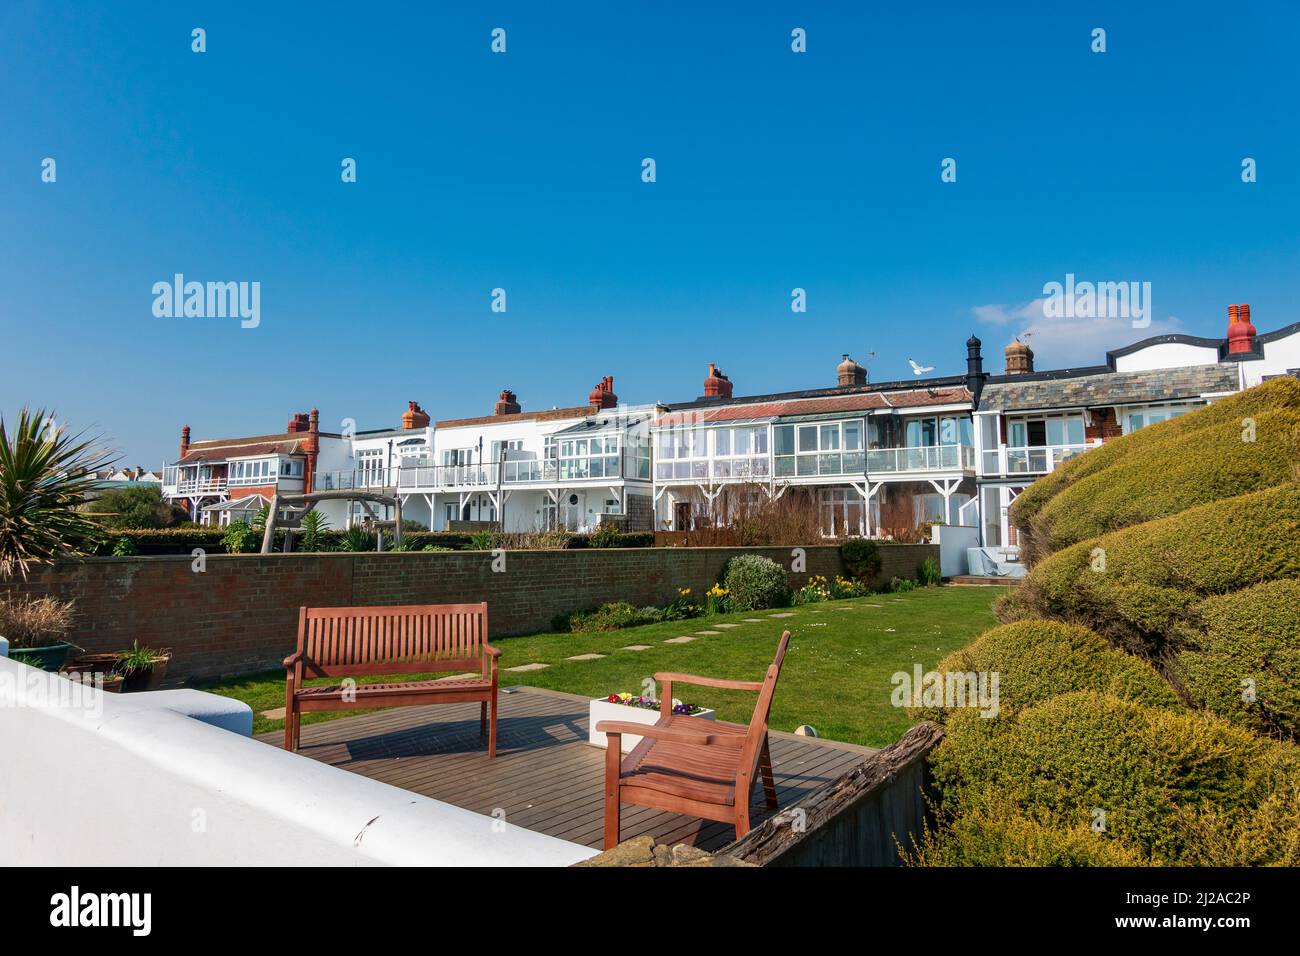 Seafront houses on the promenade at Bexhill on Sea   East Sussex, uk Stock Photo